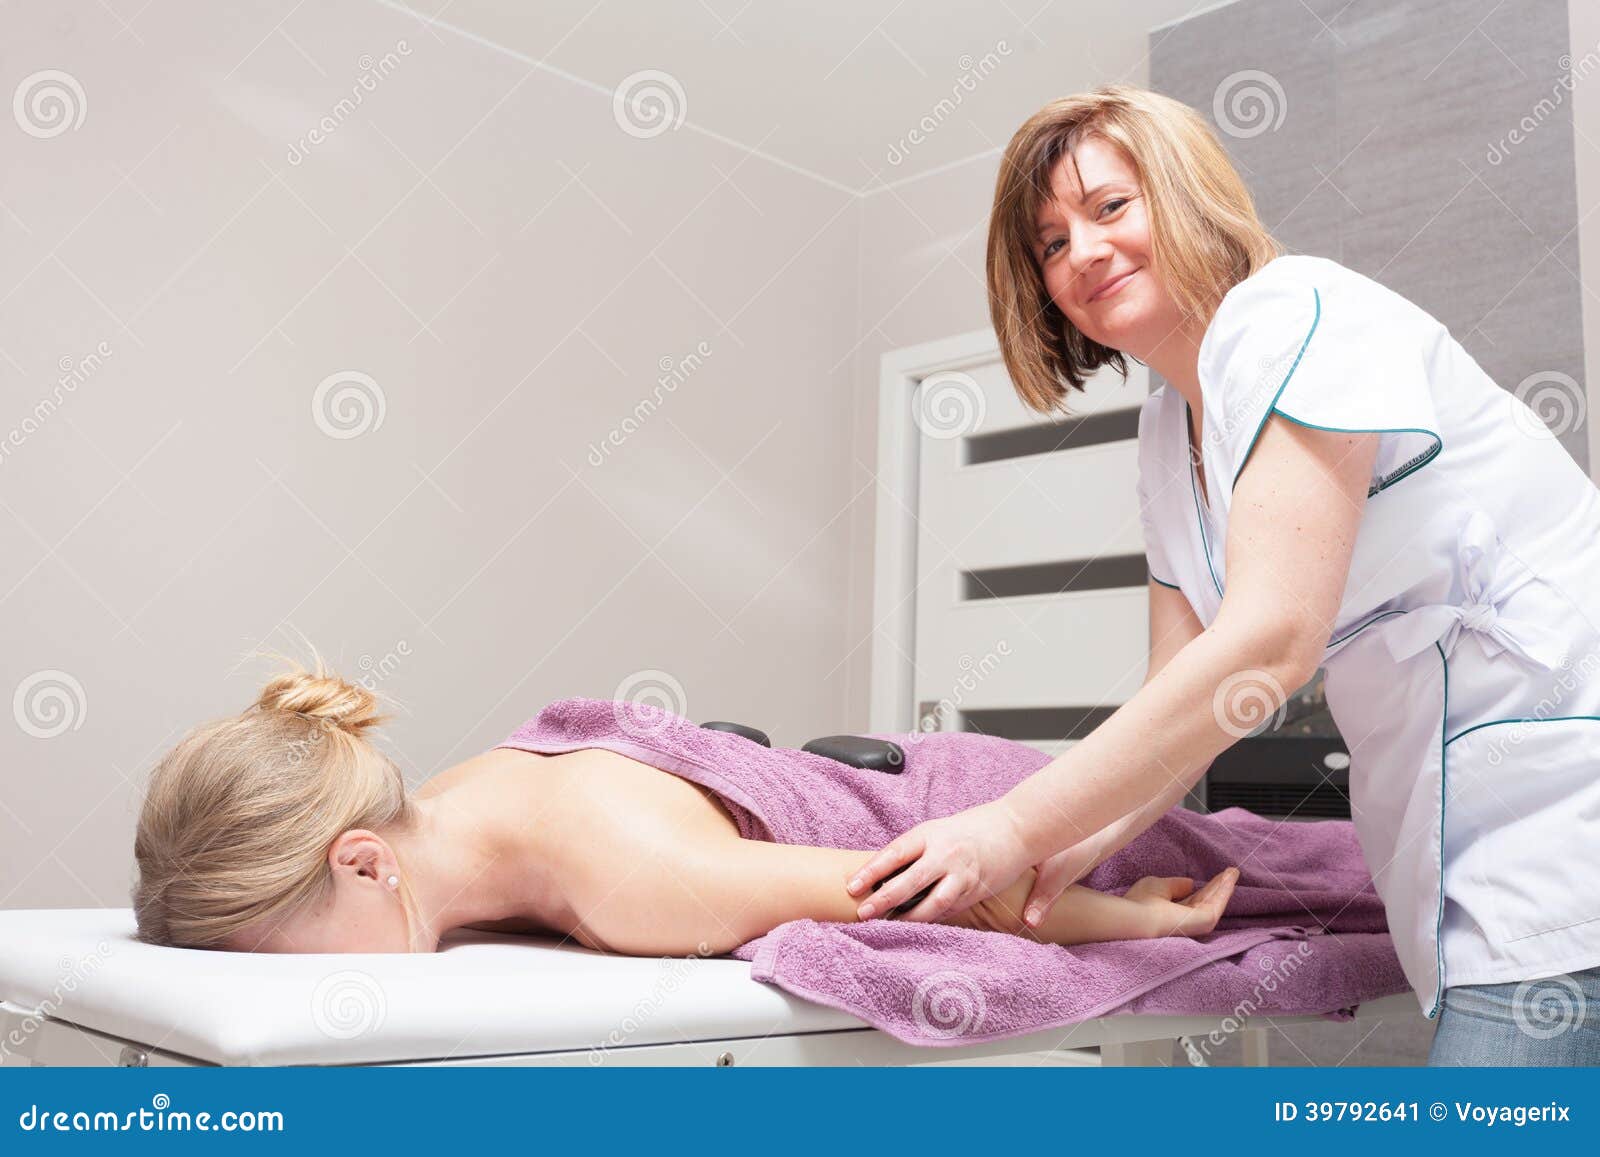 Massage with hot girl